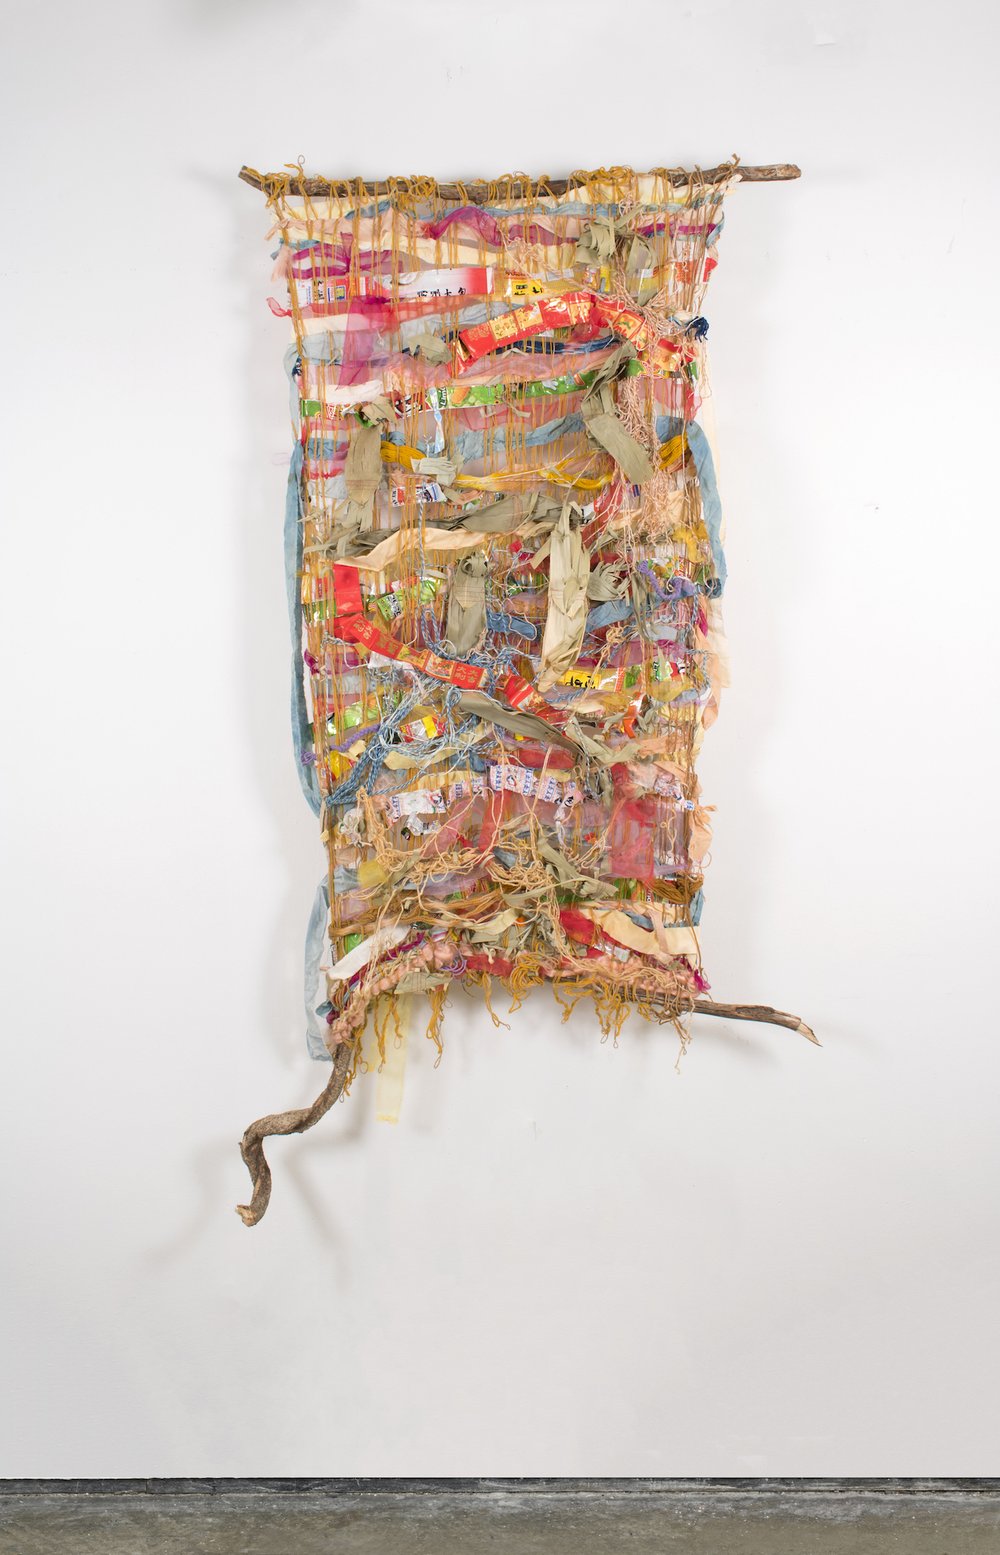  Zoila Andrea Coc-Chang,  cosas de la vida , 2021. Bittersweet branch, naturally dyed cotton, silk organza, wool, indigo, banana leaves, jute, thread, paper, and food wrappers from family, friends and my own consumption; 7 ft. x 3.5 ft. x 6 in. Photo